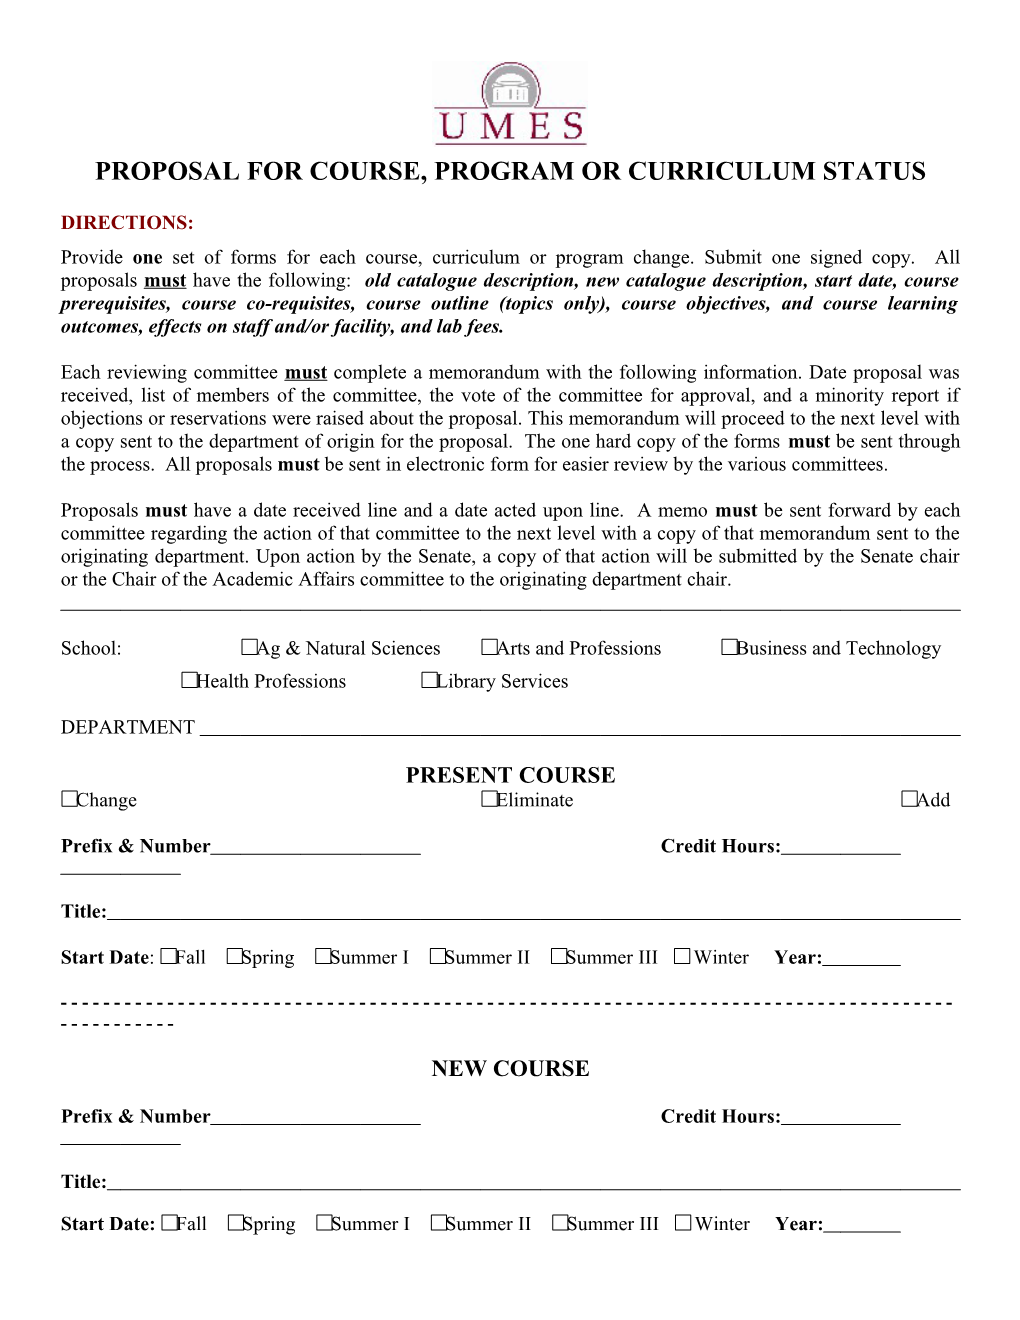 Proposal for Course, Program Or Curriculum Status